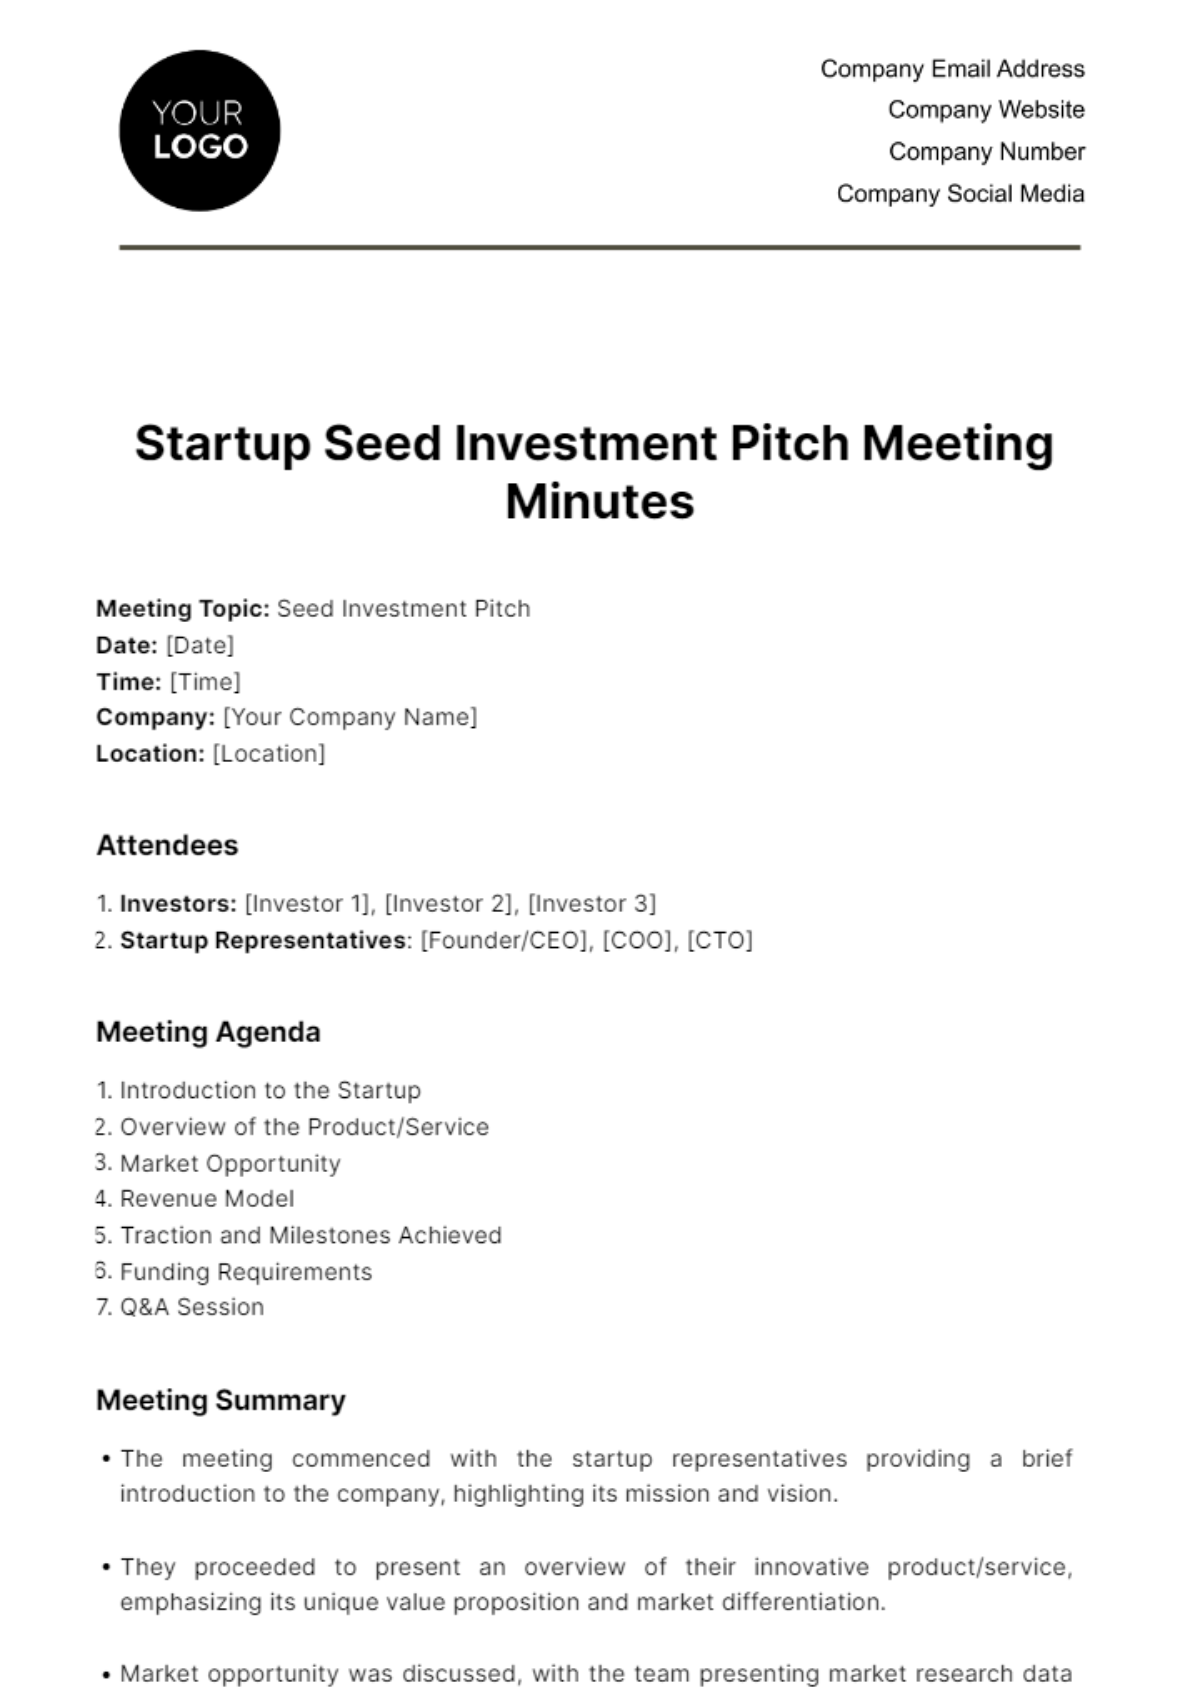 Free Startup Seed Investment Pitch Meeting Minute Template